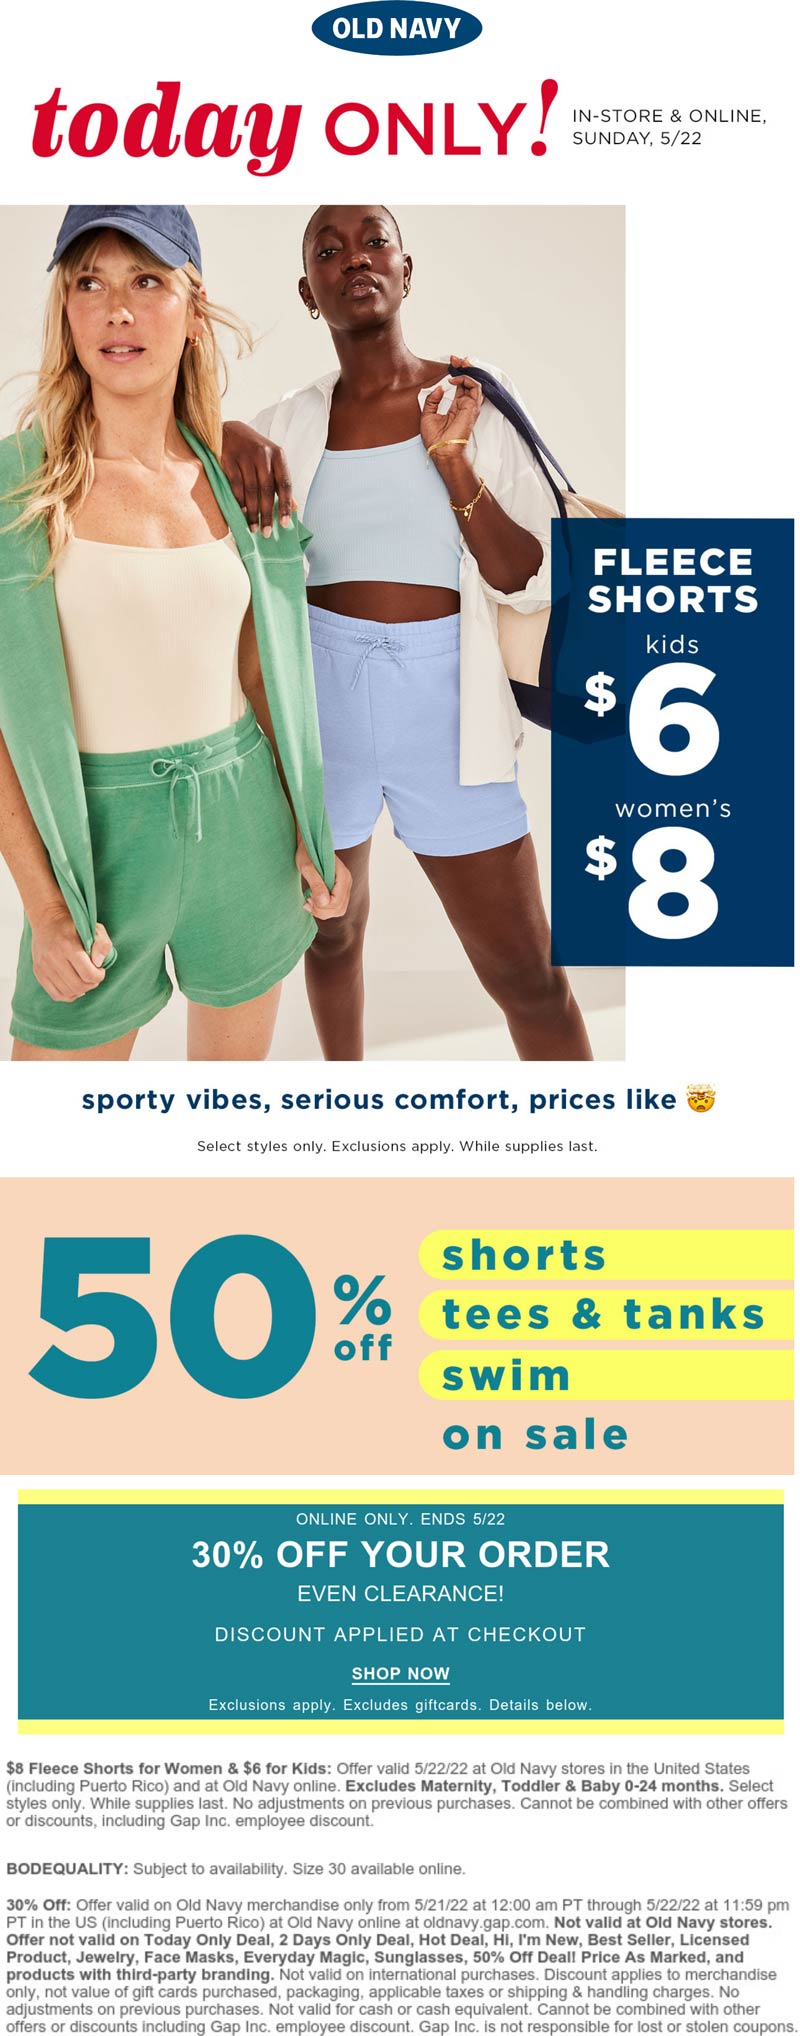 Old Navy stores Coupon  $8 fleece shorts + 30% off online today at Old Navy #oldnavy 